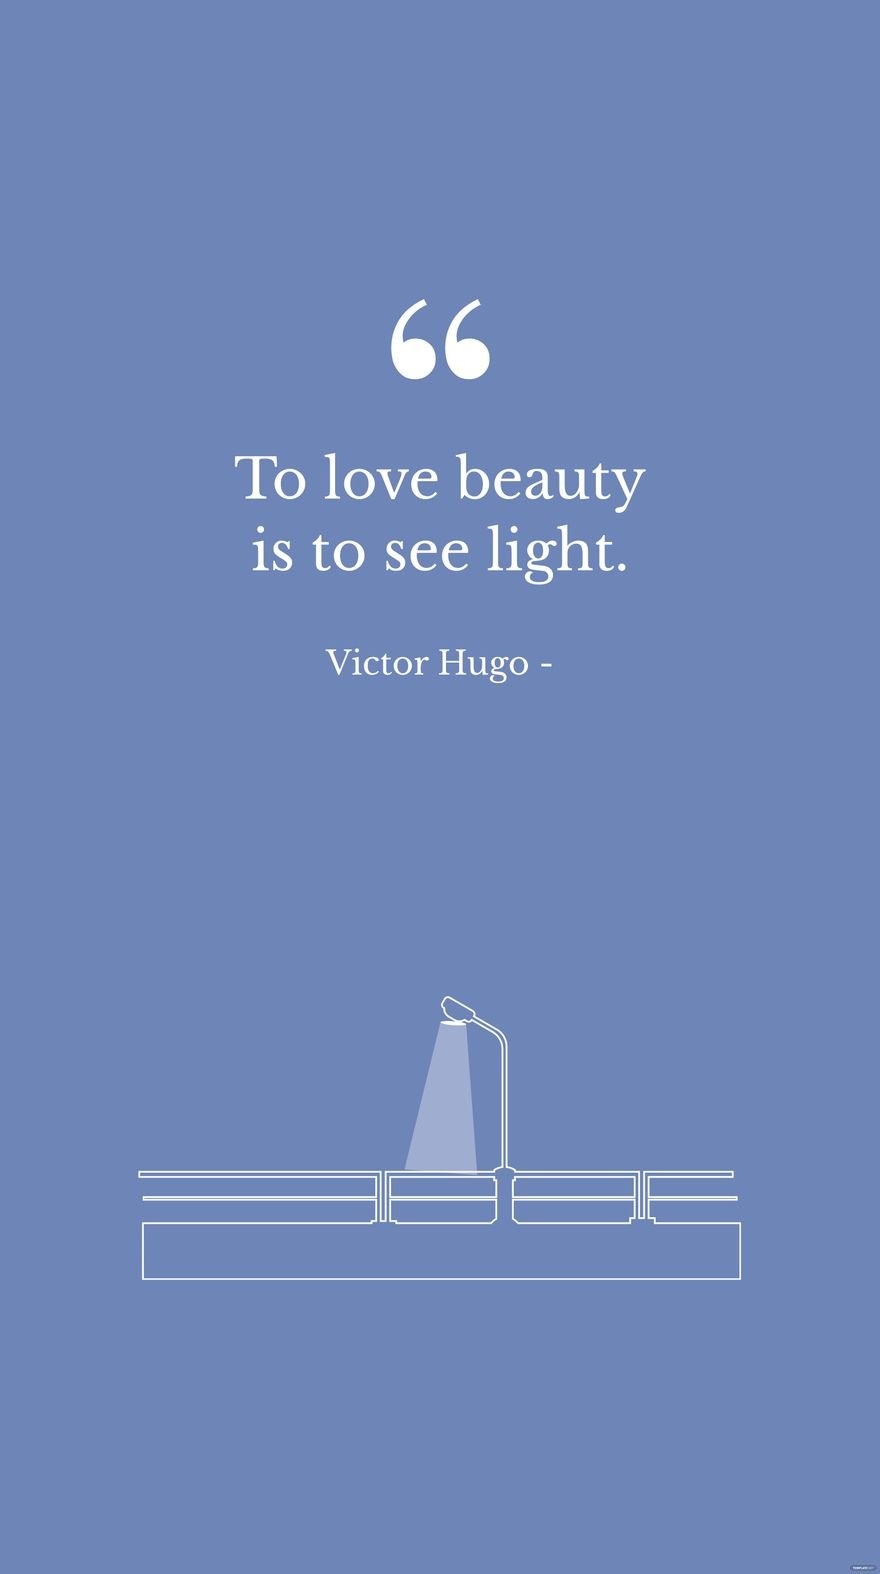 Free Victor Hugo - To love beauty is to see light. in JPG